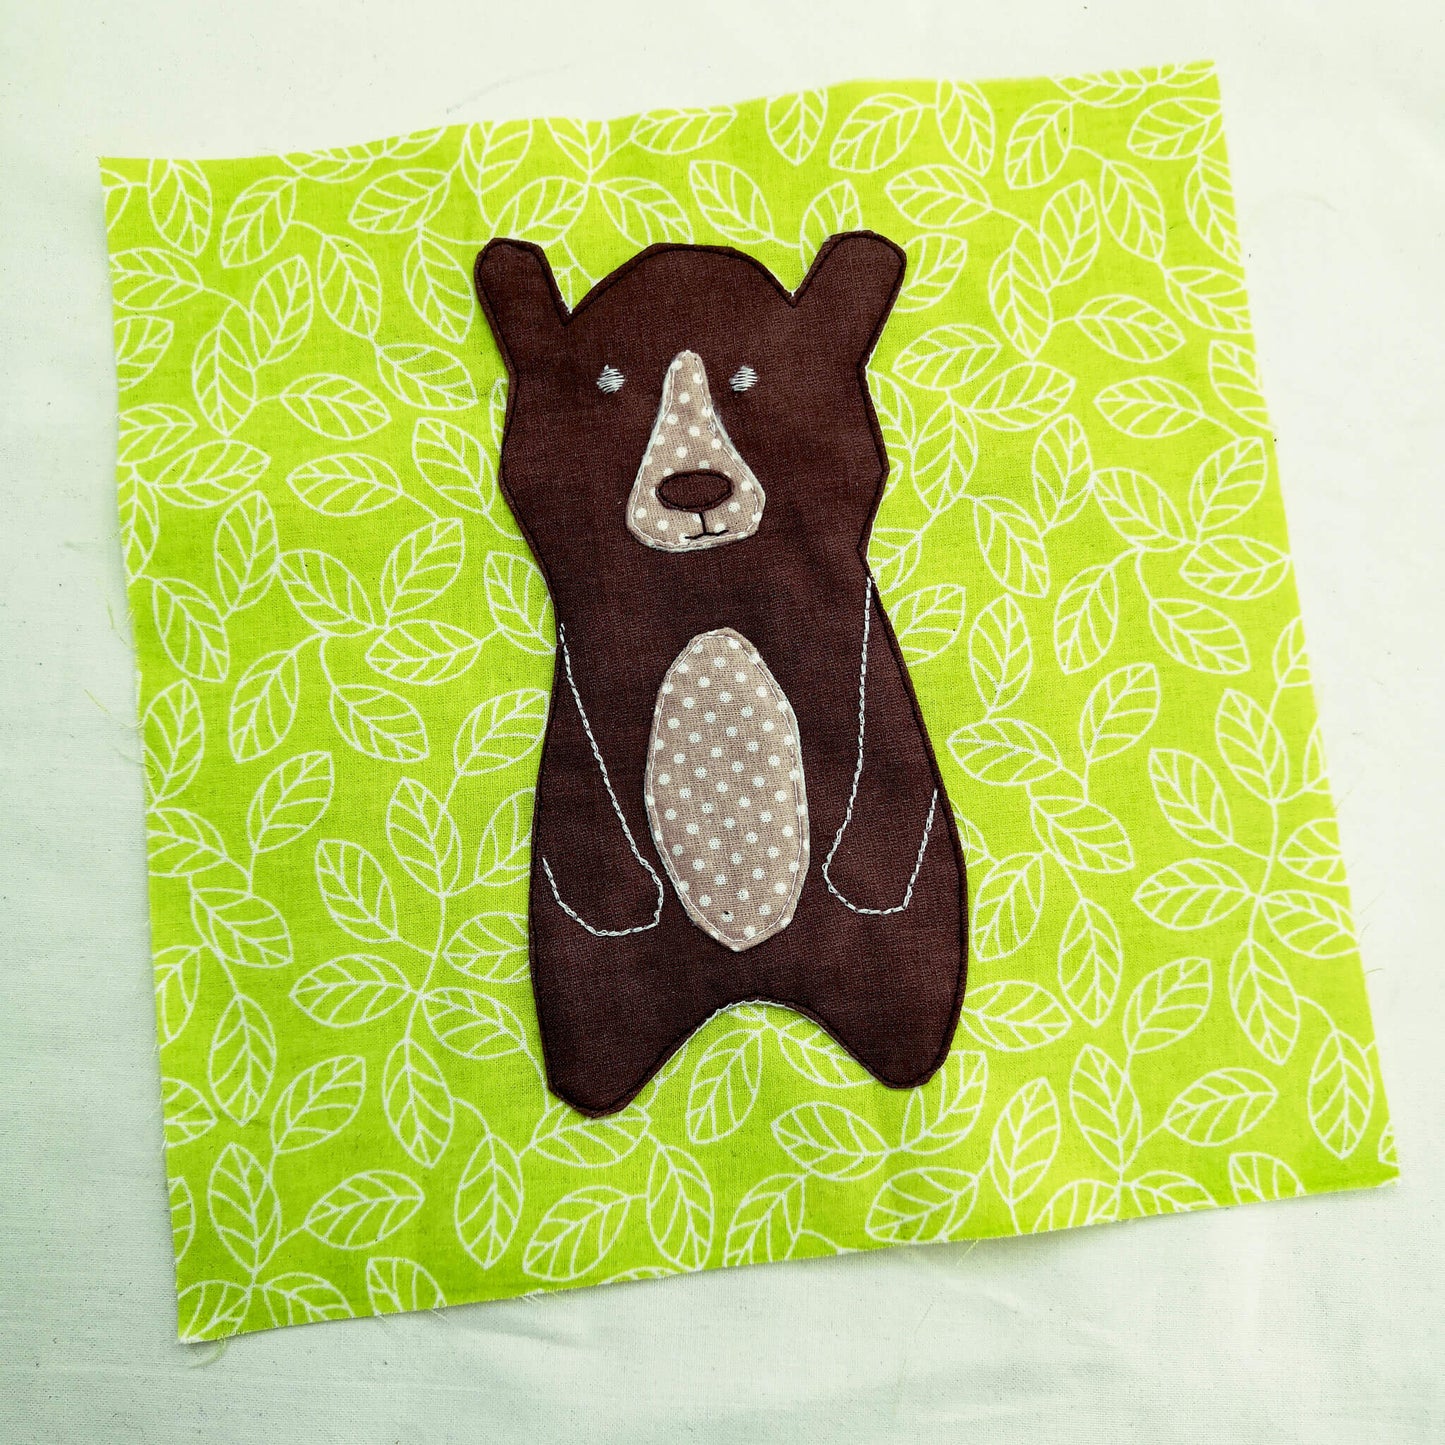 Bear appliqued on a fabric